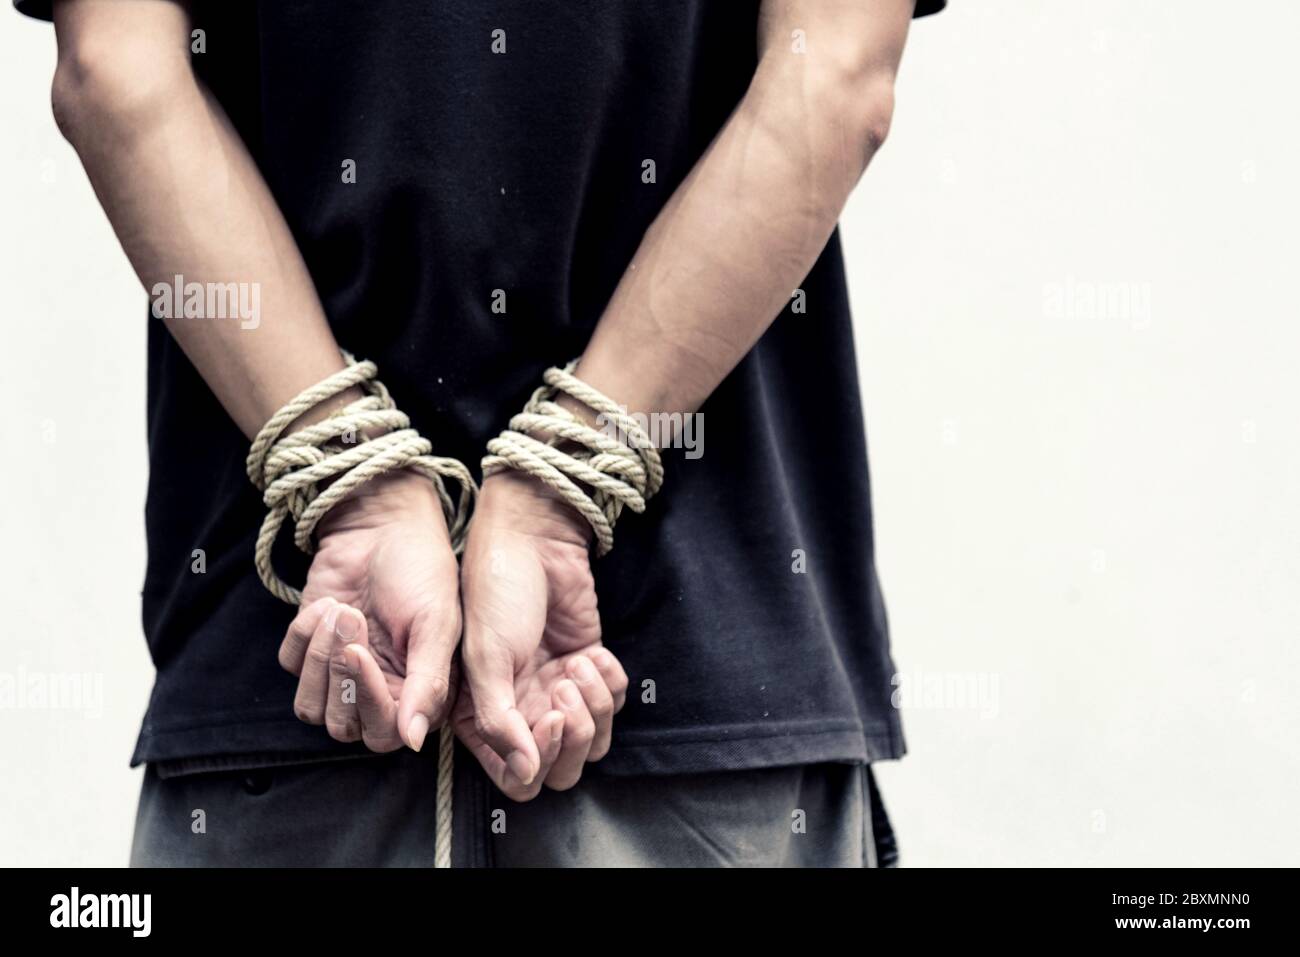 The man was bundle cross the arms by rope / Slave Stock Photo